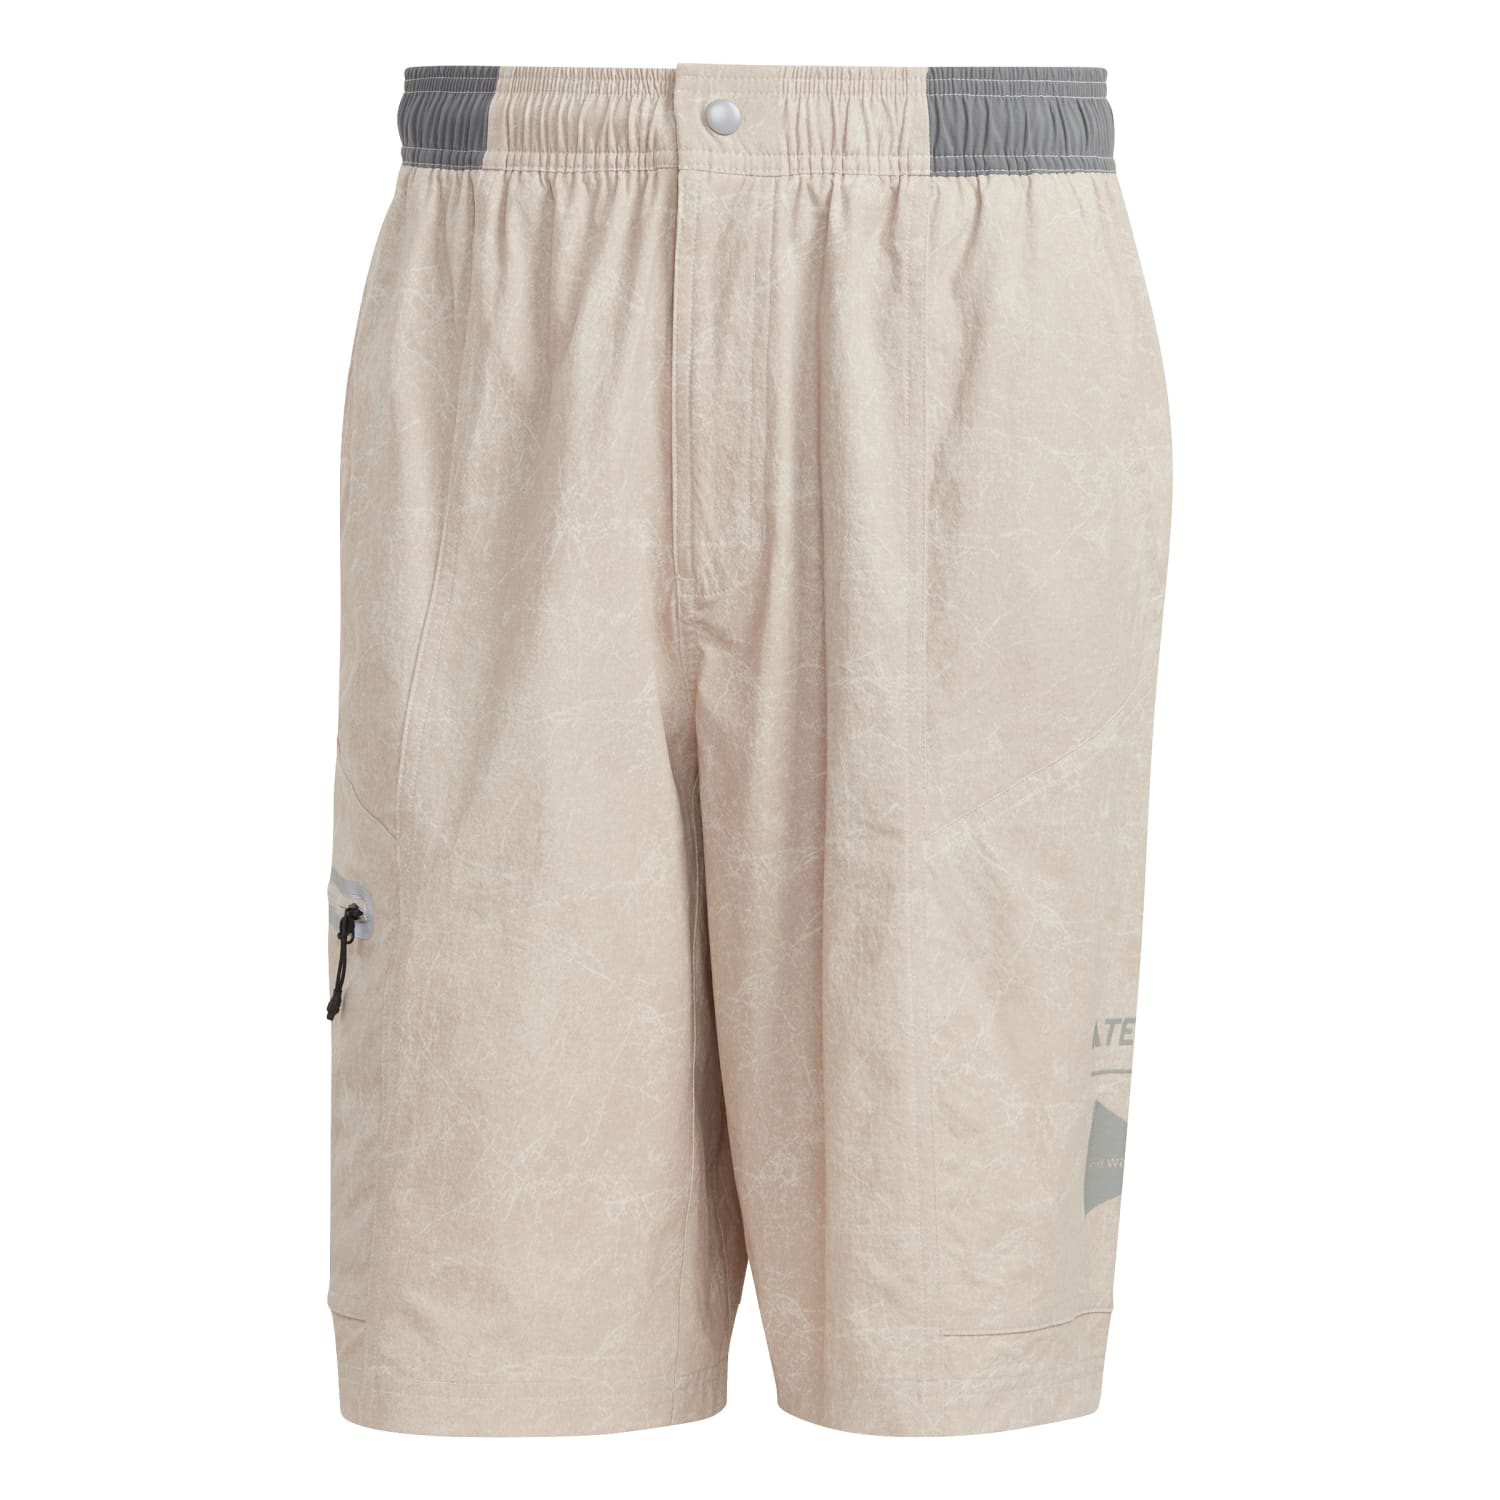 adidas outdoor men awd shorts taupe hr7135 192